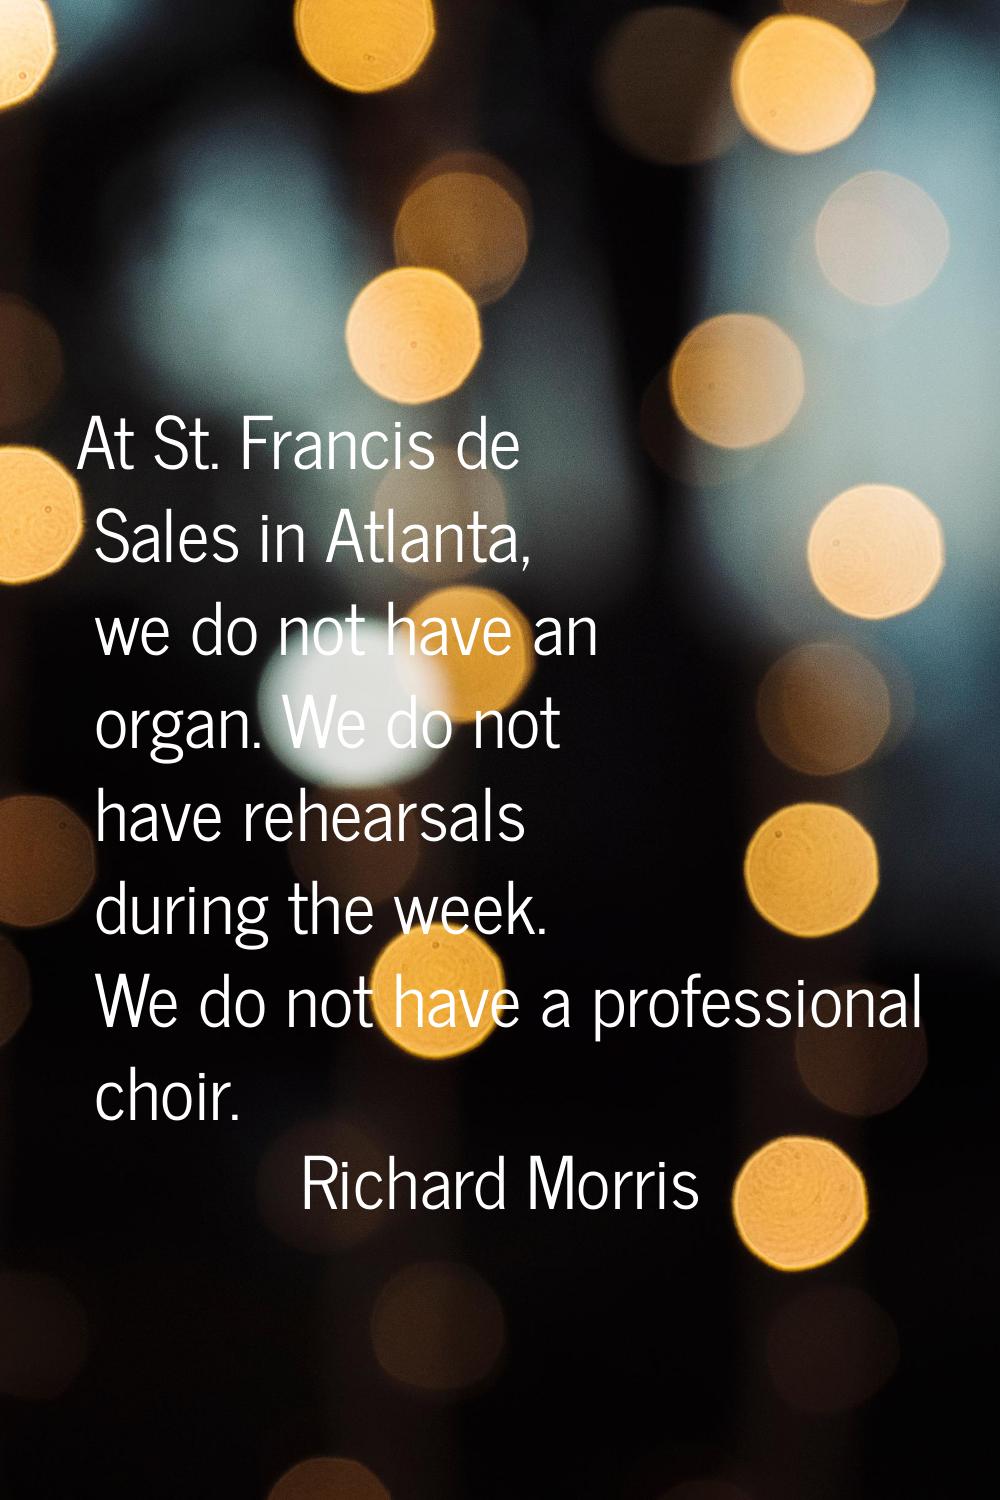 At St. Francis de Sales in Atlanta, we do not have an organ. We do not have rehearsals during the w